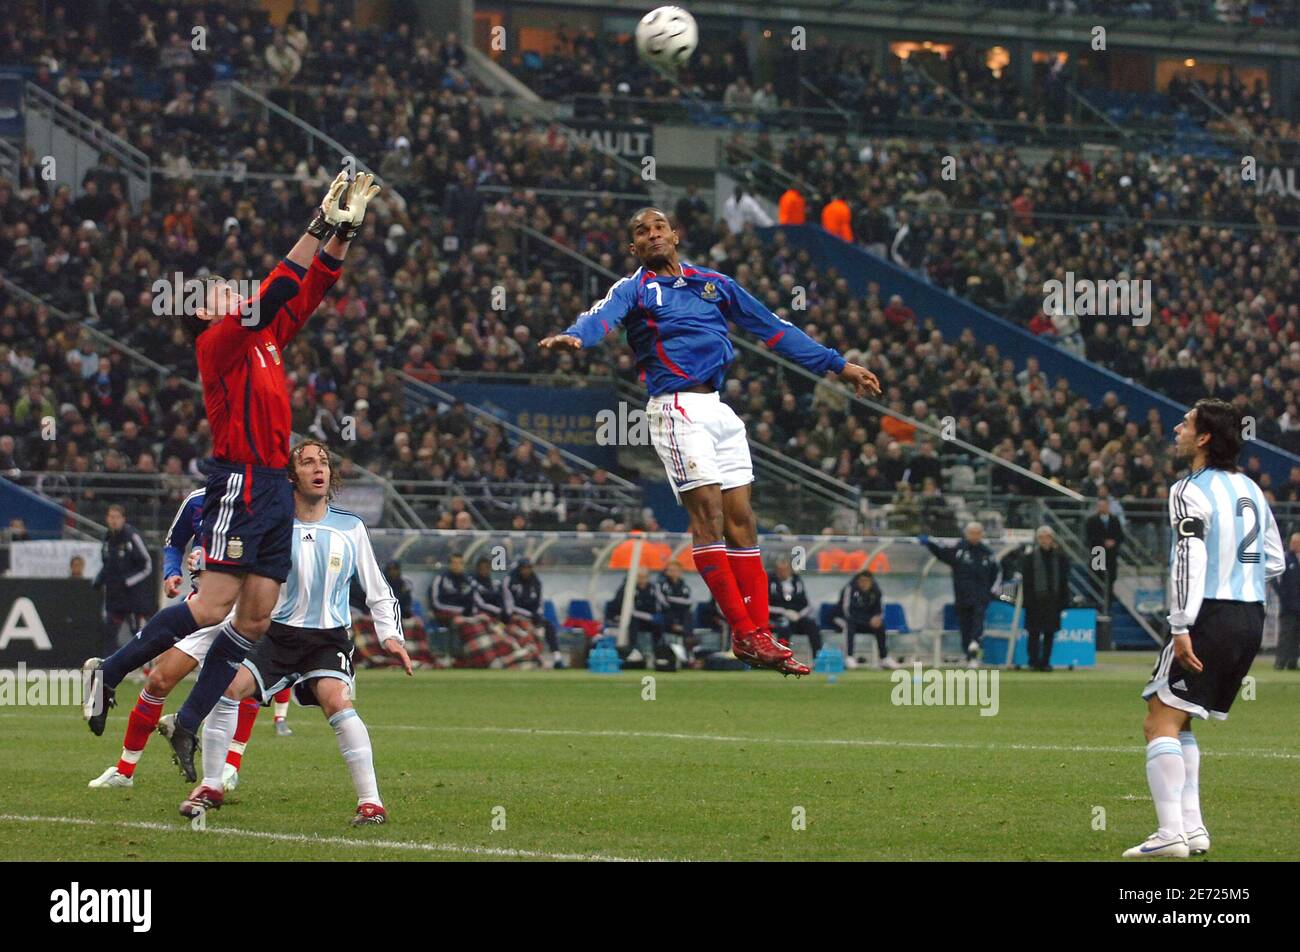 France's Florent Malouda and ARgentina's goalkepper Roberto Abbondanzieri during the international friendly match, France vs Argentina at the stade de France, in Saint-Denis, near Paris, on February 7, 2007. Argentina won 1-0. Photo by Gouhier-Taamallah/Cameleon/ABACAPRESS.COM Stock Photo